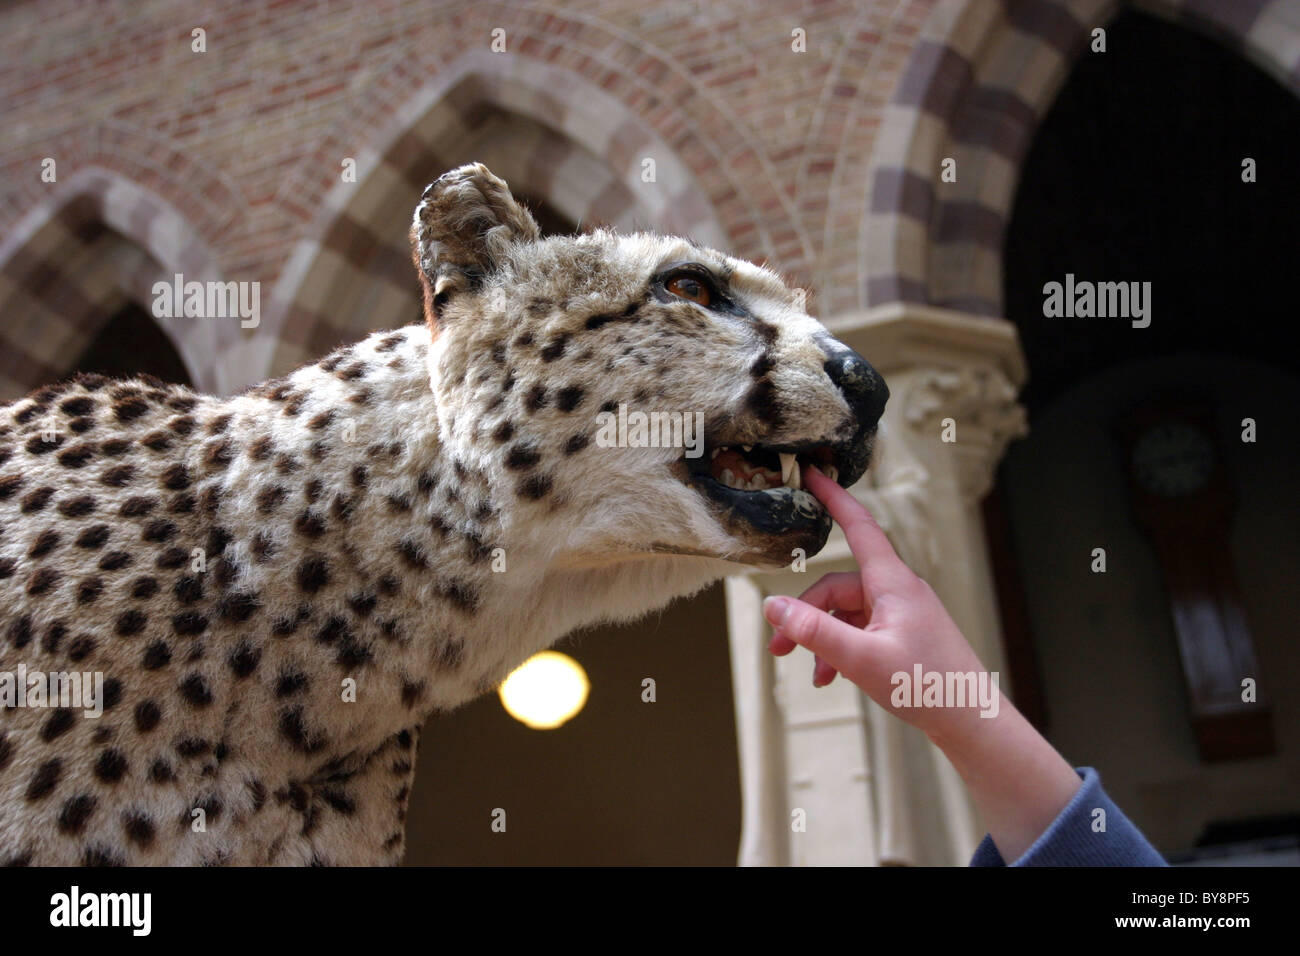 Die Oxford University Museum of Natural History Stockfoto